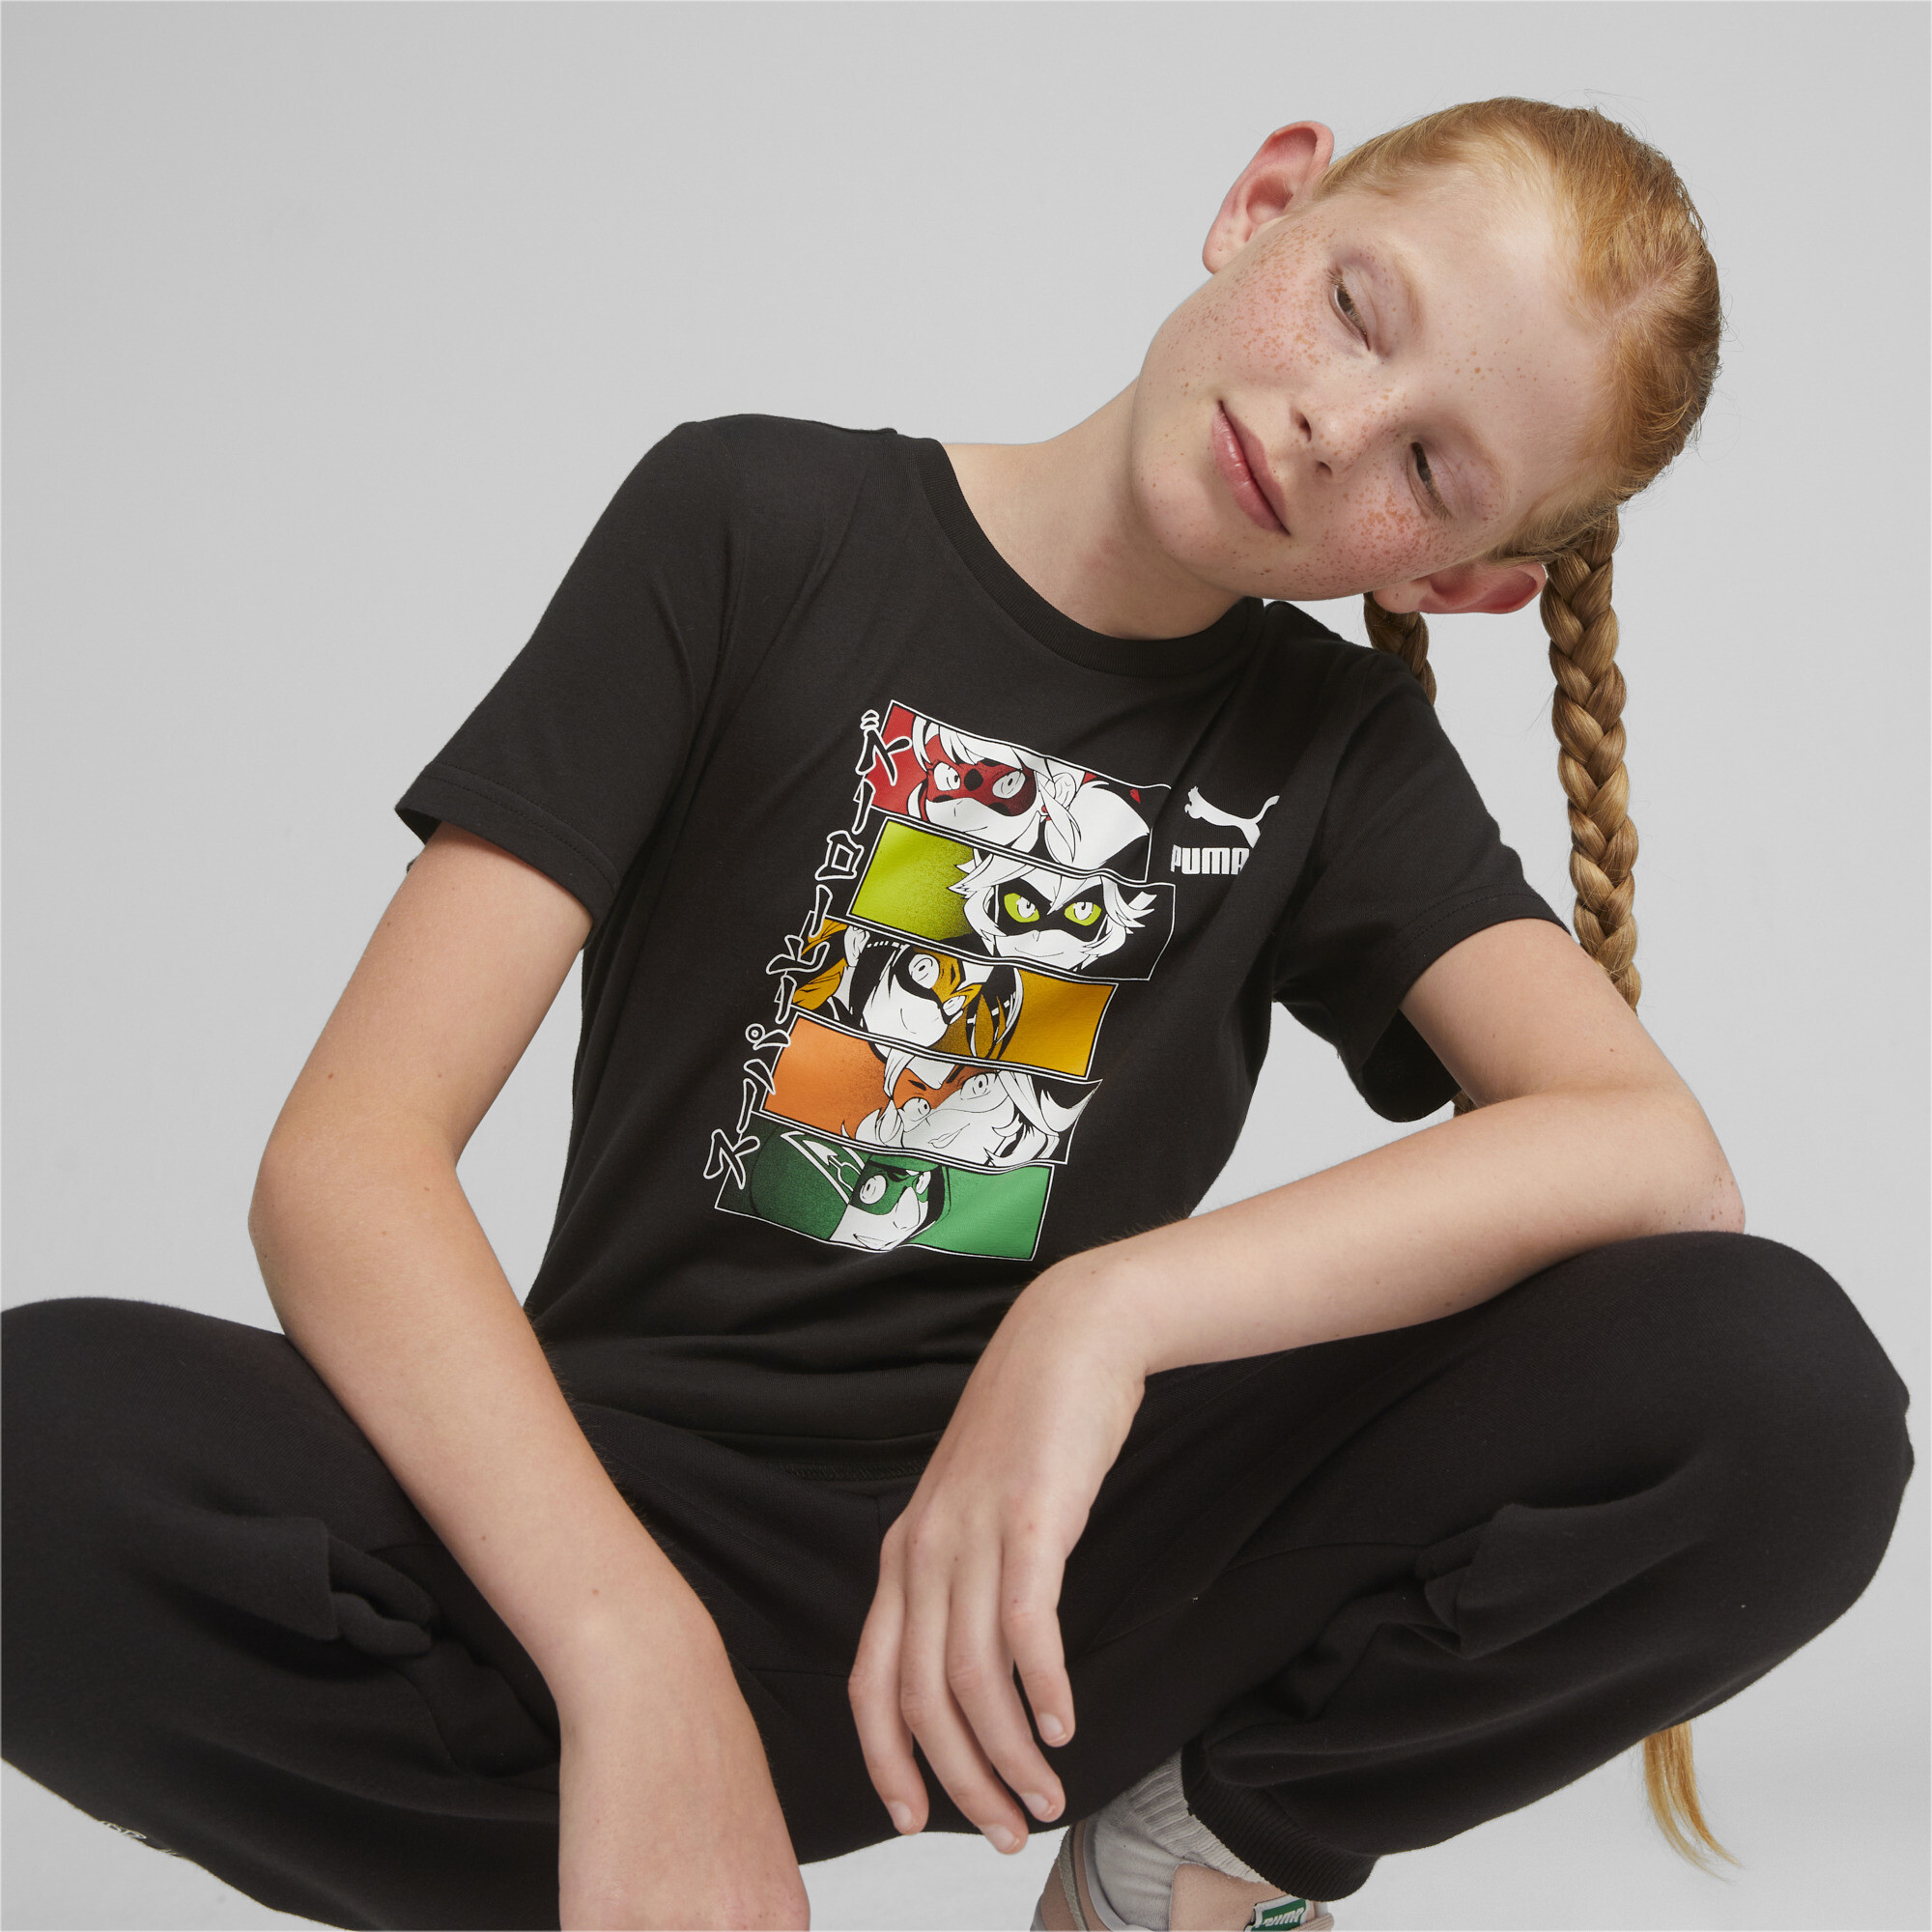 PUMA X MIRACULOUS T-Shirt In 10 - Black, Size 11-12 Youth